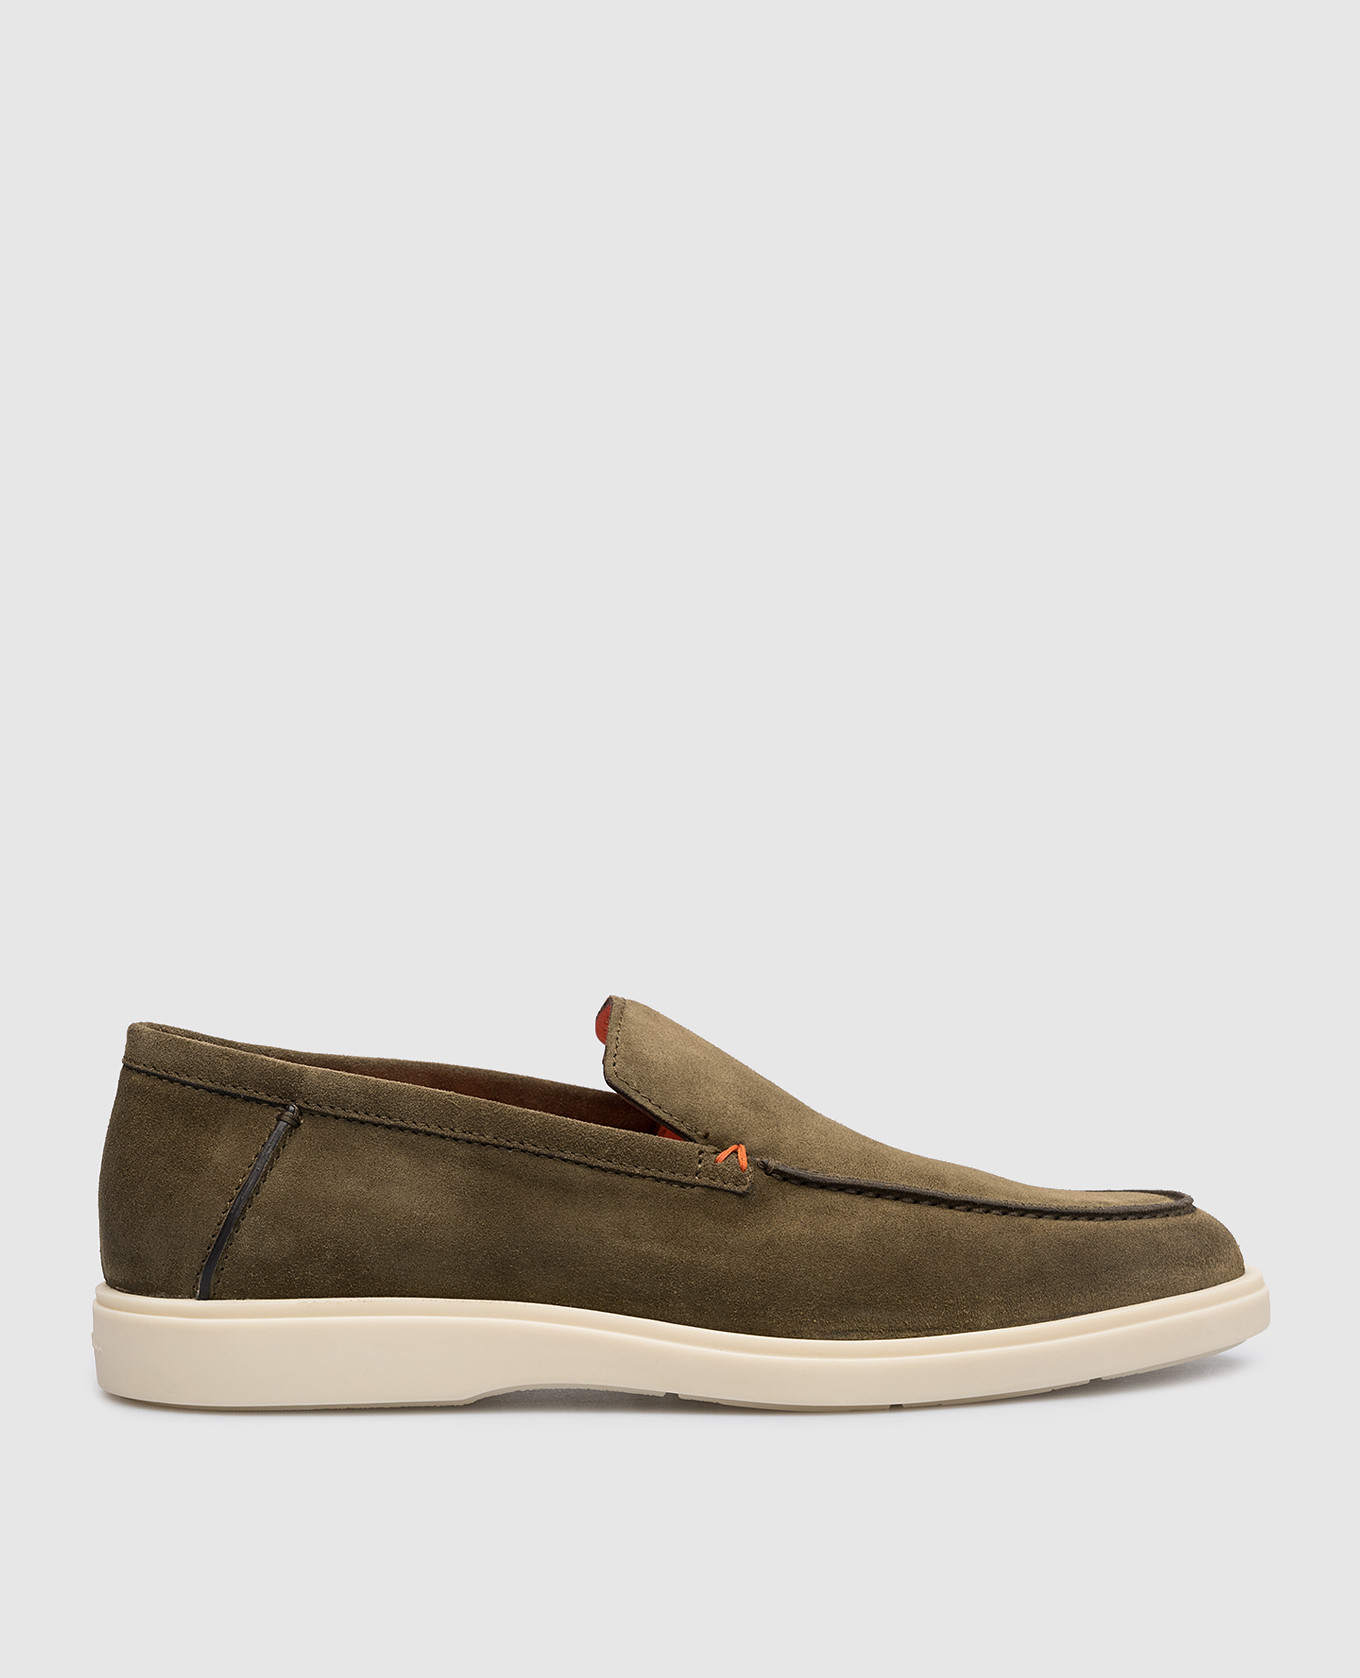 Khaki suede slippers